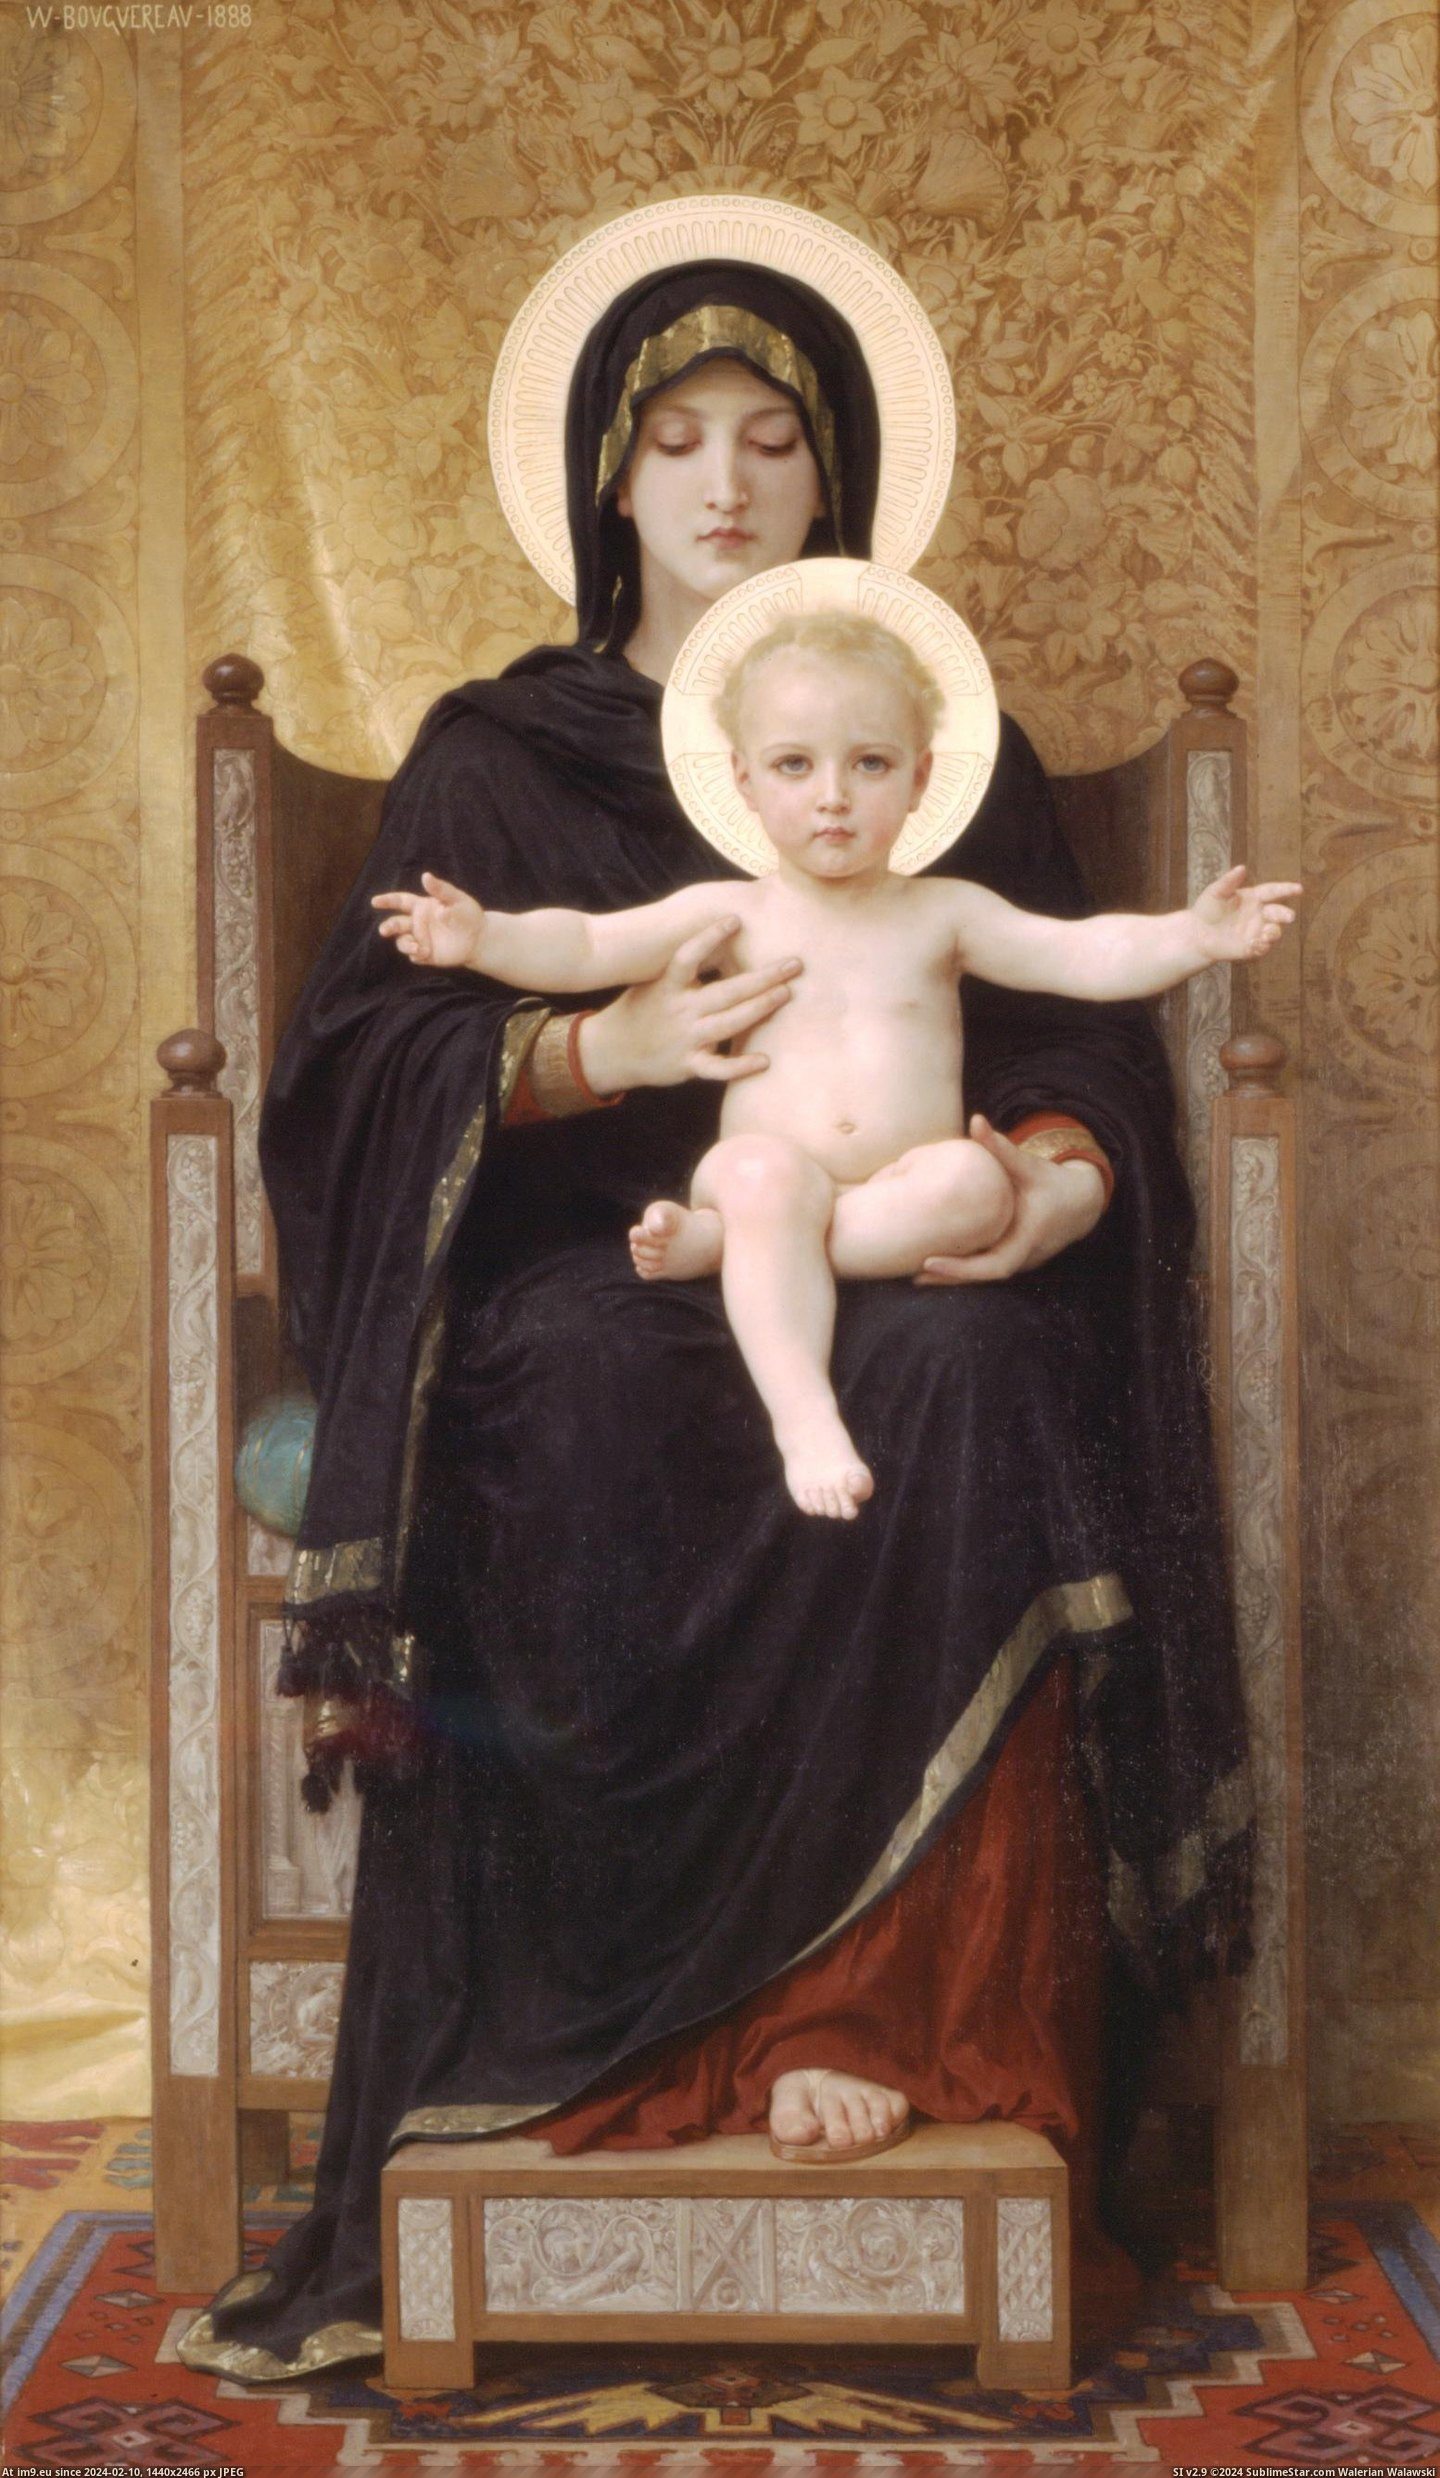 (1888) Madone Assise - William Adolphe Bouguereau (in William Adolphe Bouguereau paintings (1825-1905))